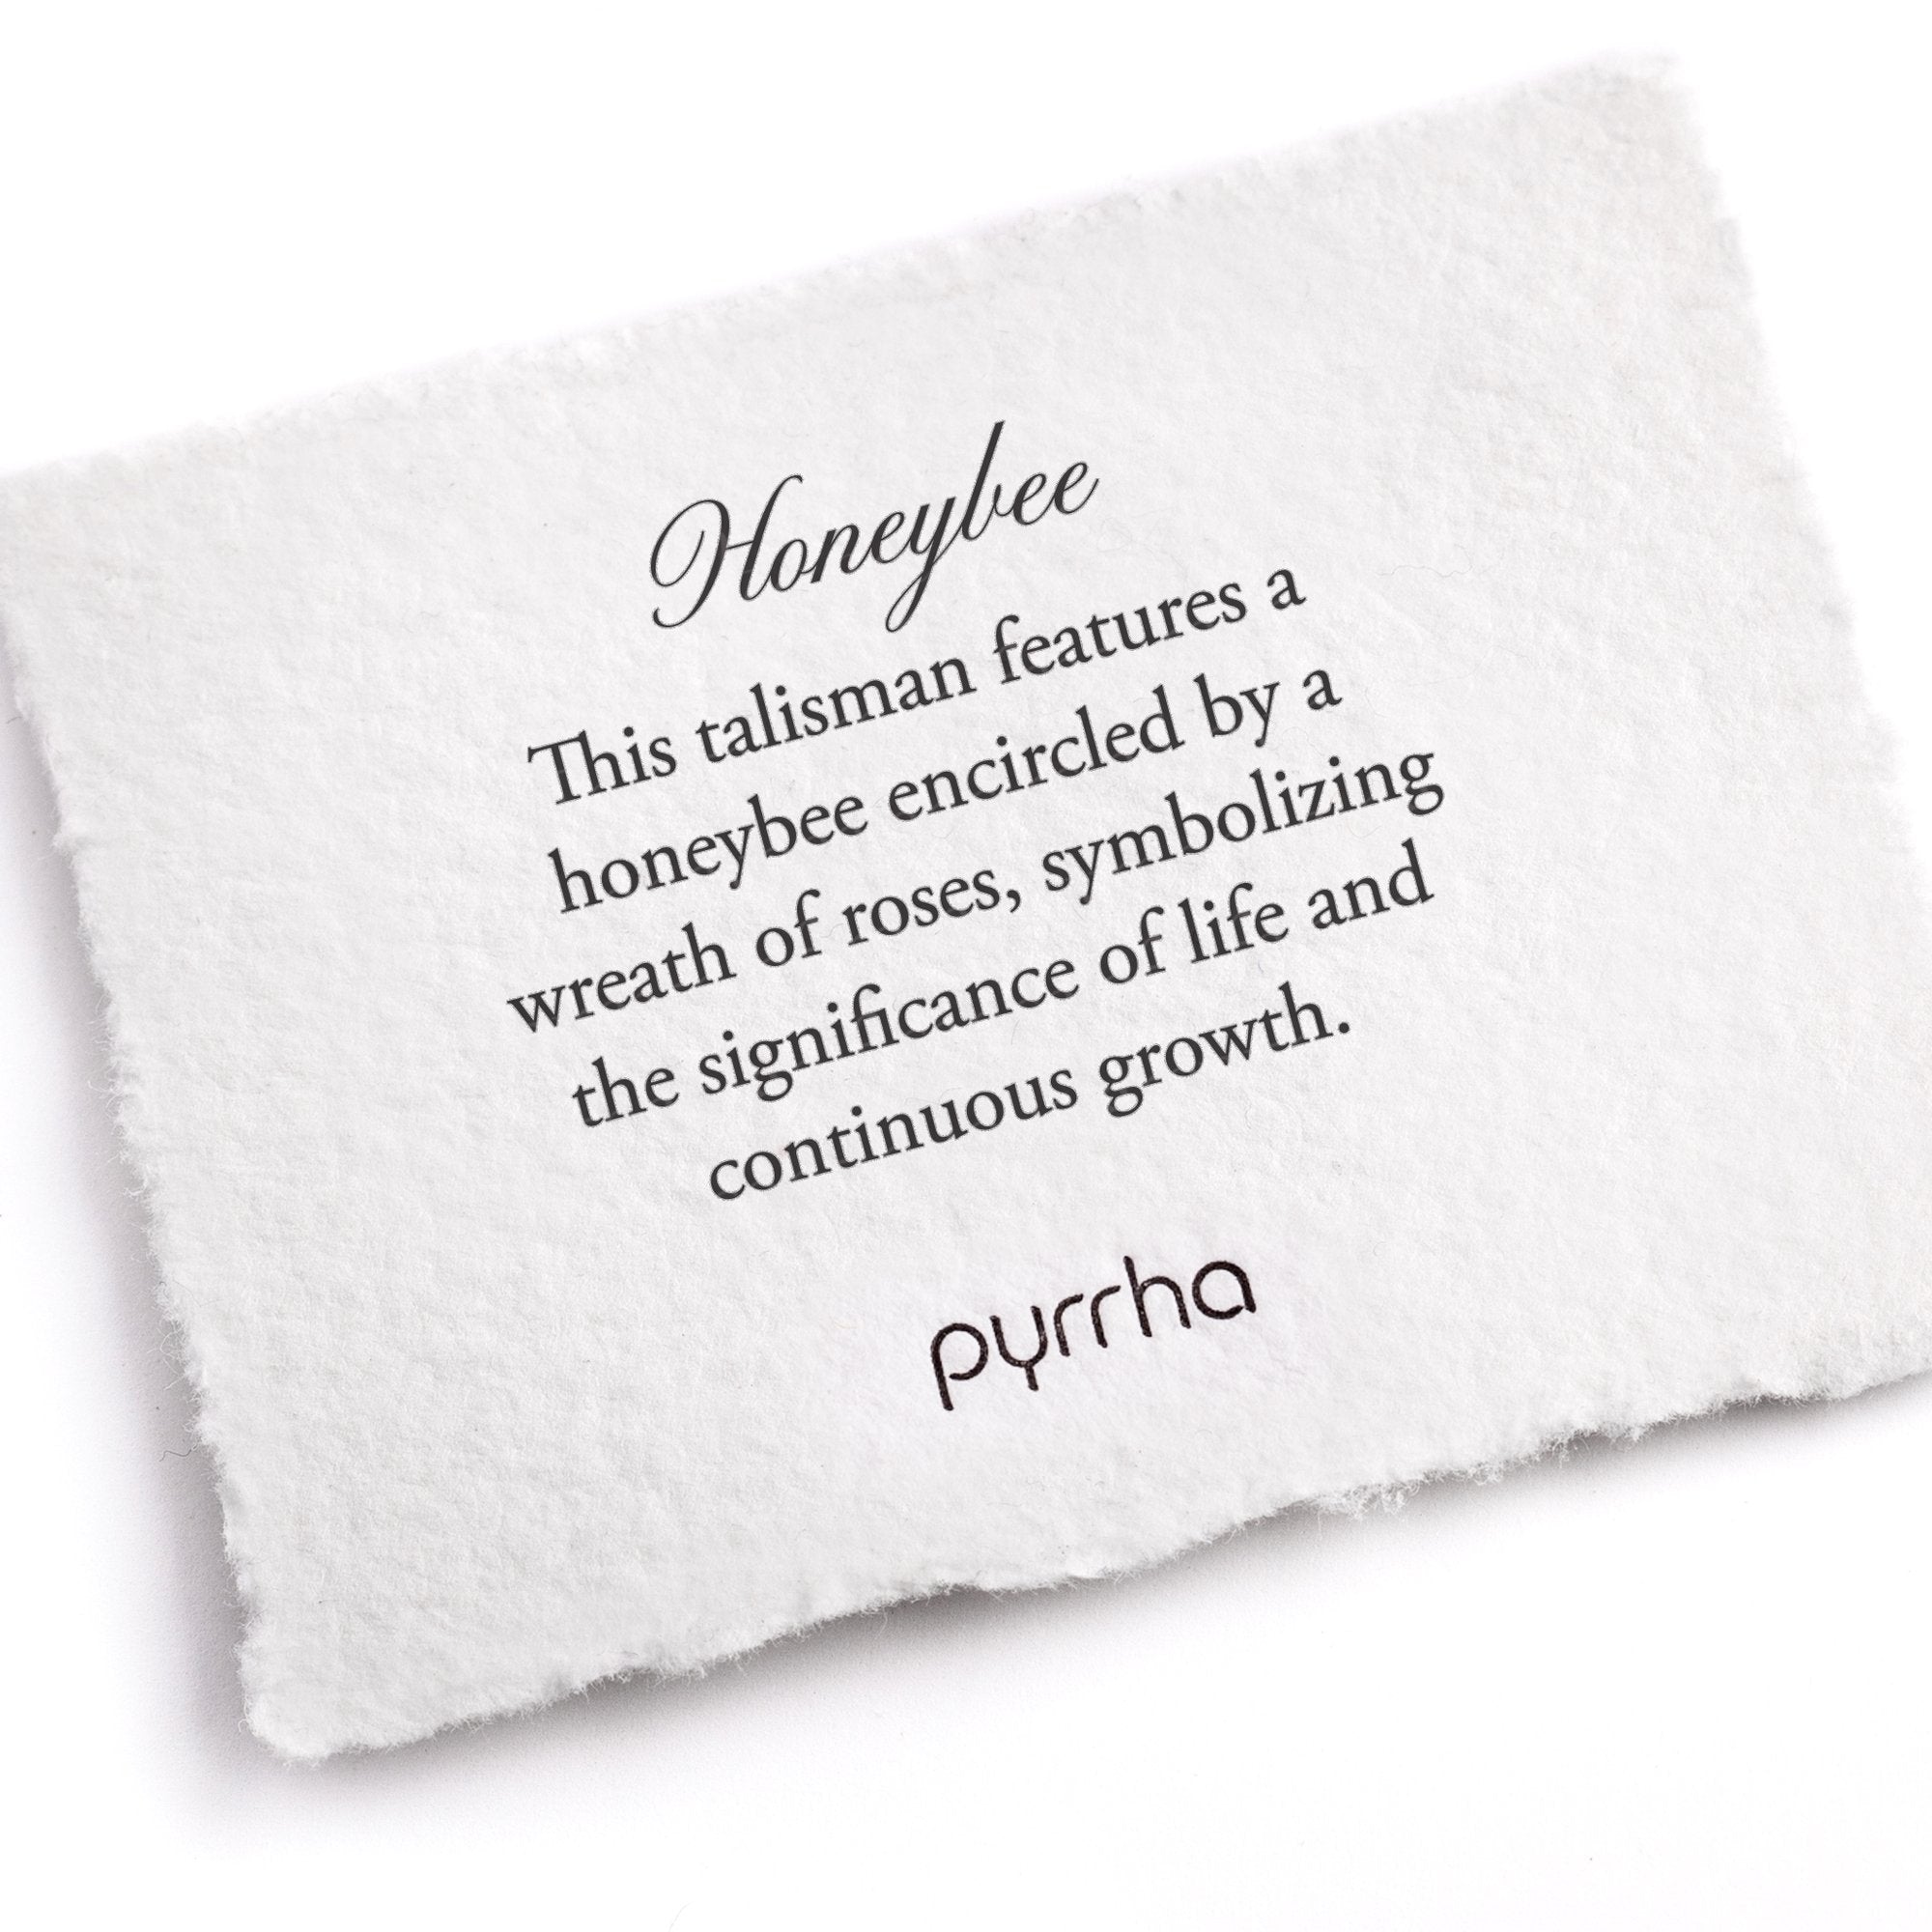 A hand-torn, letterpress printed card describing the meaning for Pyrrha's Honeybee Talisman Necklace